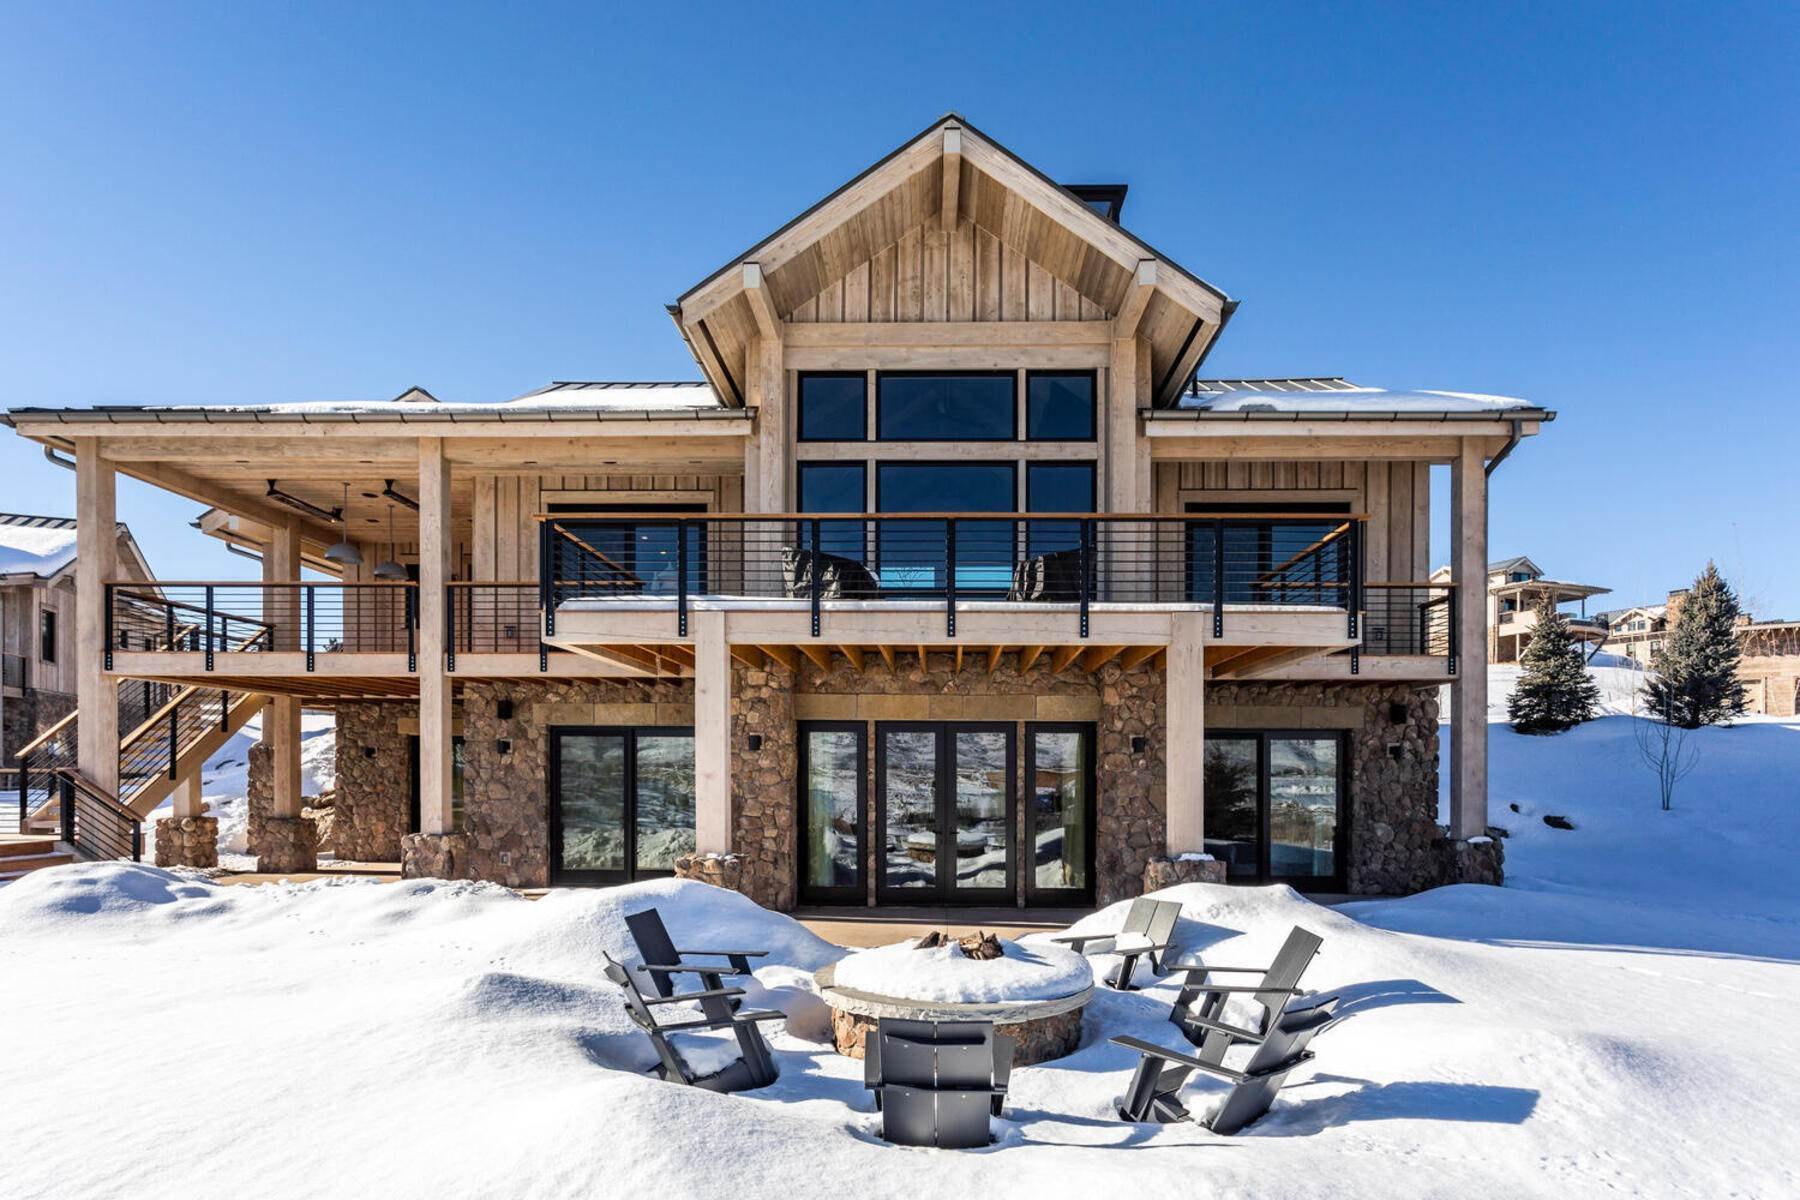 Fractional Ownership Property for Sale at 1/8 Fractional Ownership Opportunity In Brand New Kingfisher Cabin 7767 E Stardust Court #321A, 5.25 Heber City, Utah 84032 United States